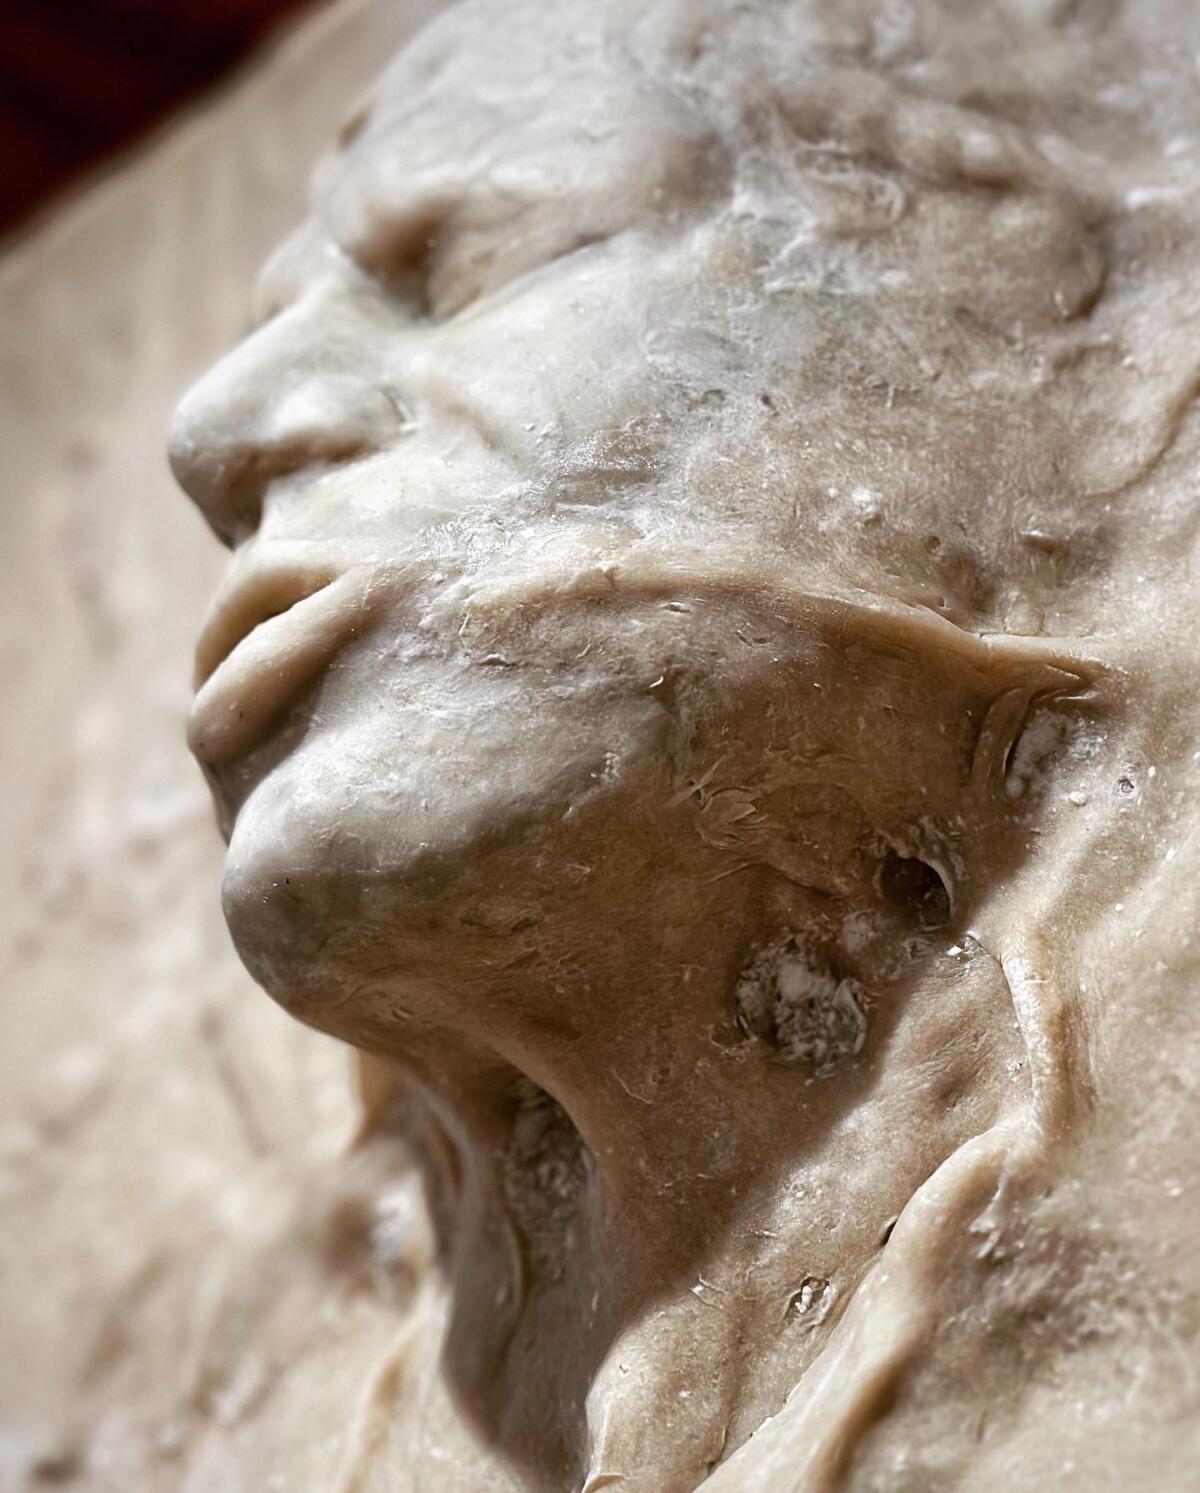 A bread sculpture depicting a man's anguished features 